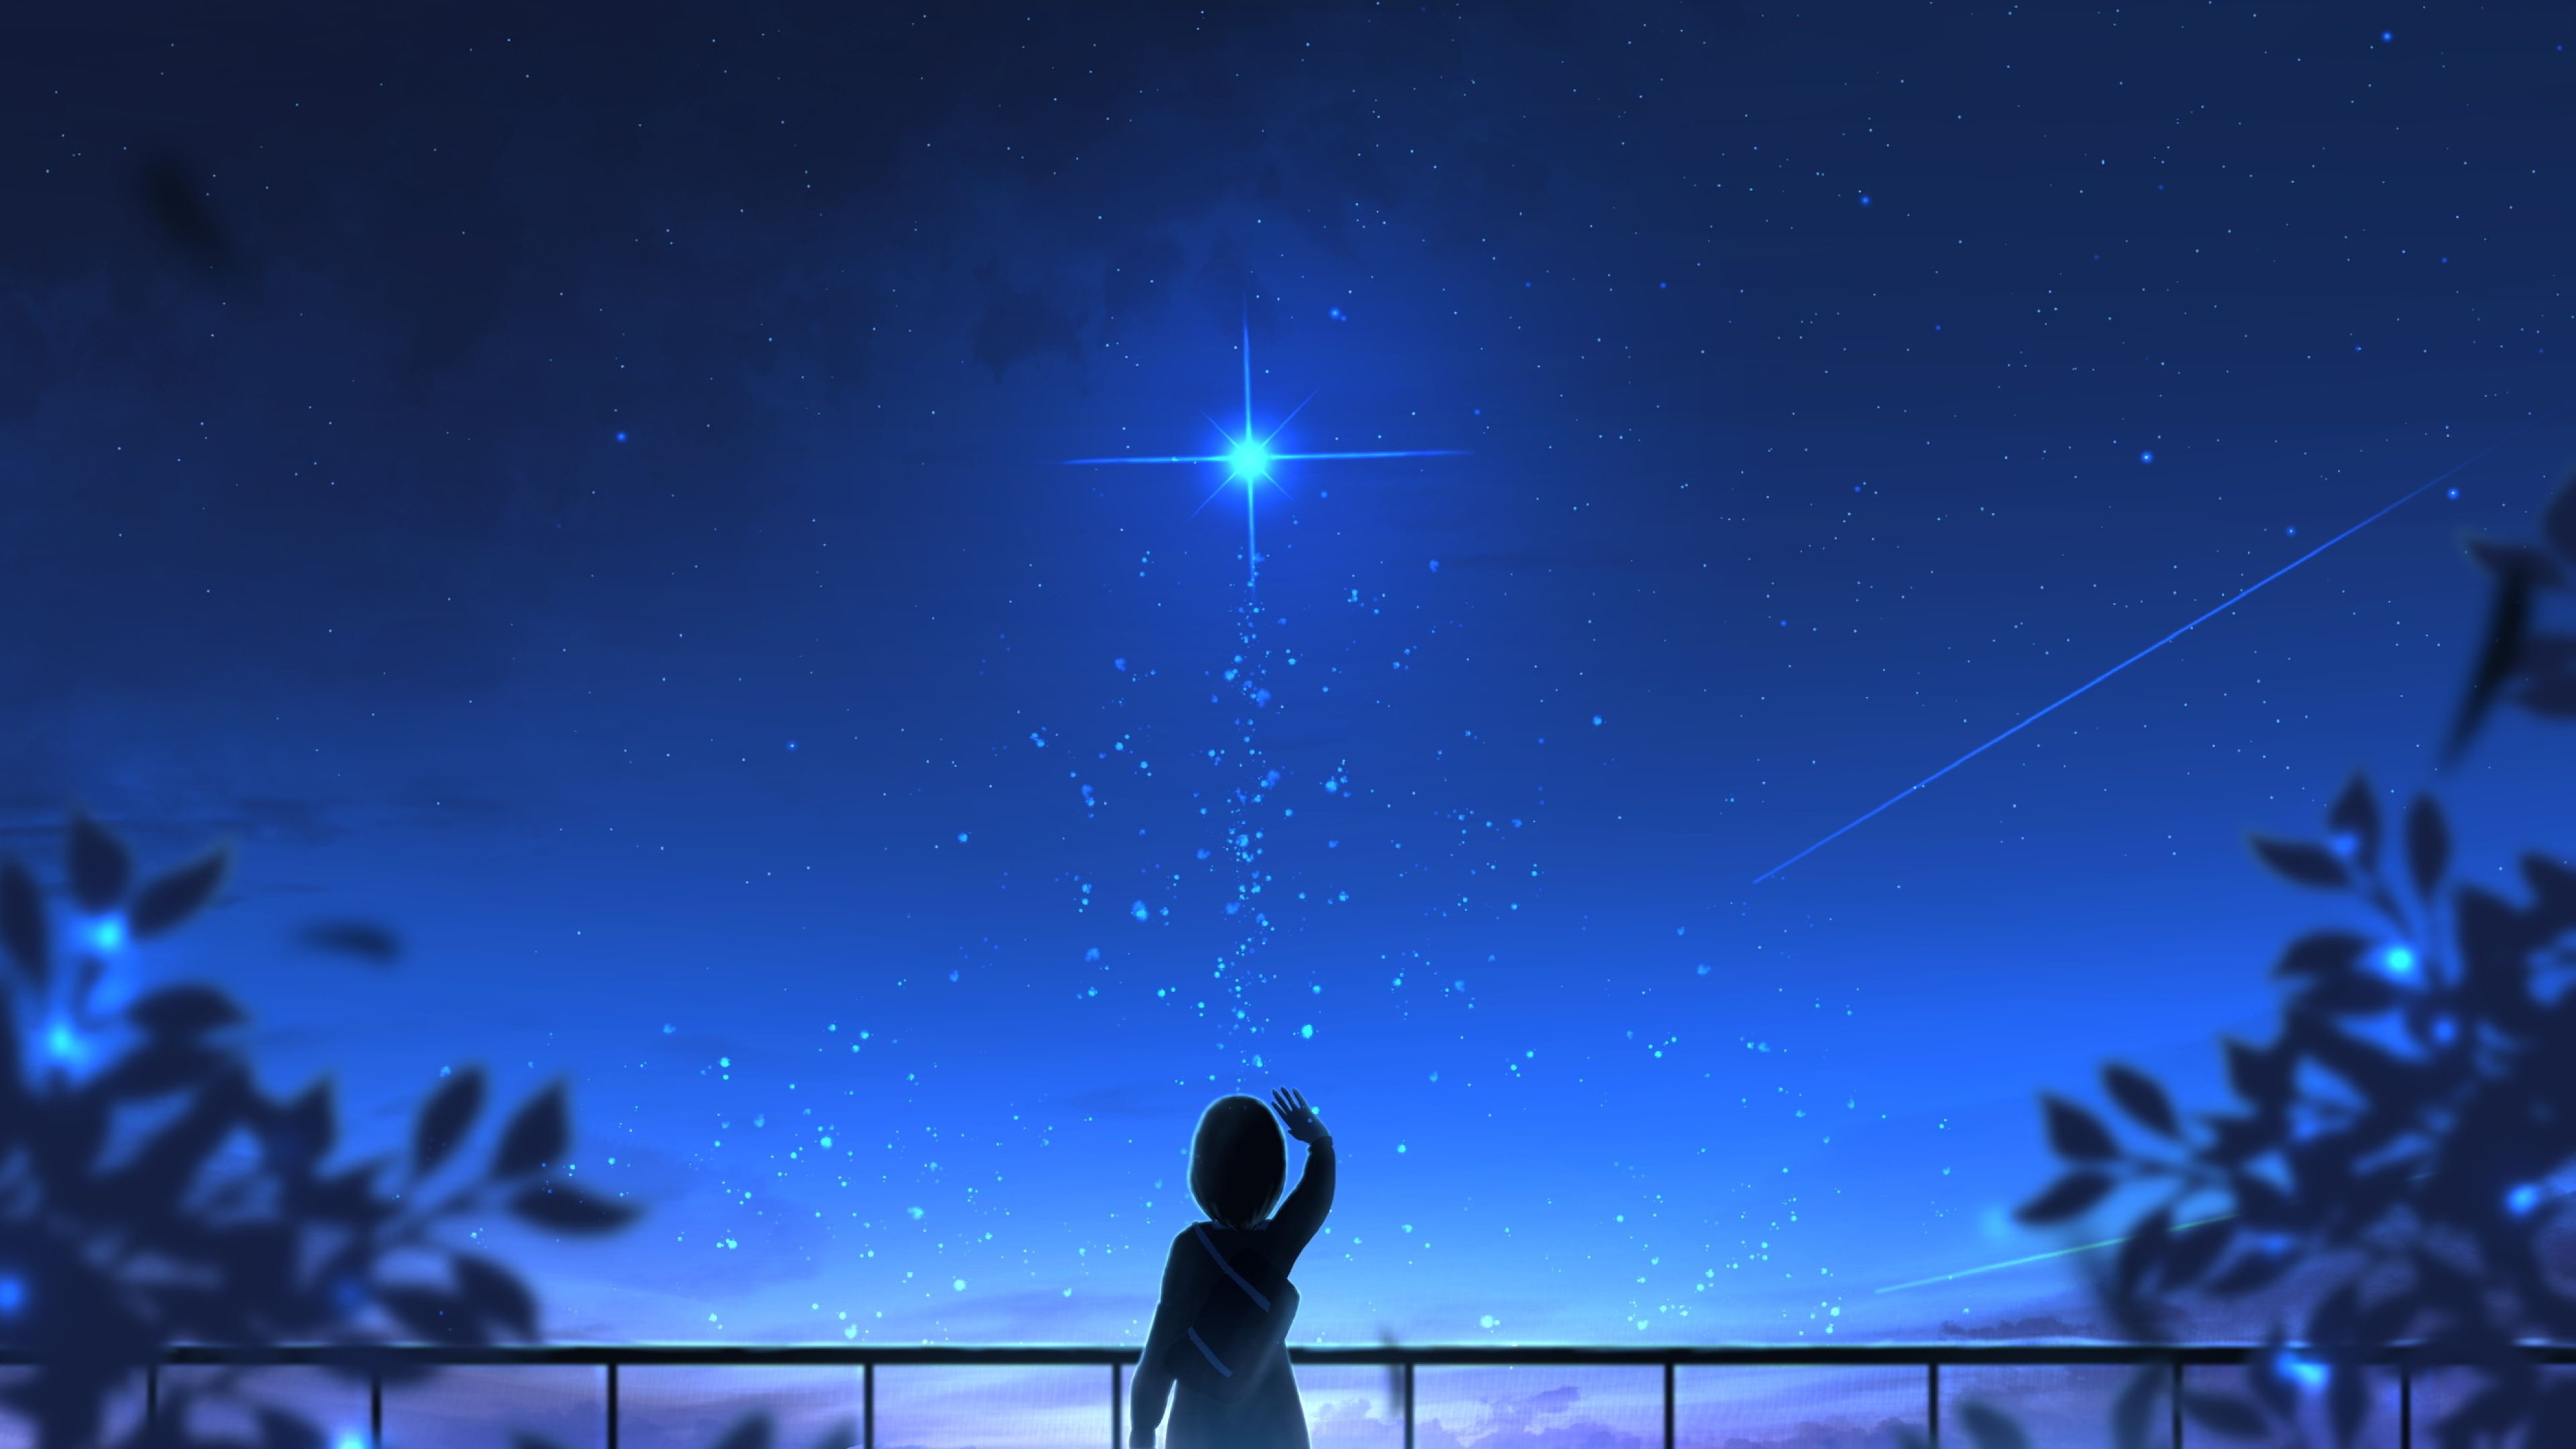 Broken Girl Looking At Sky 4K Wallpaper, HD Anime 4K Wallpaper, Image, Photo and Background